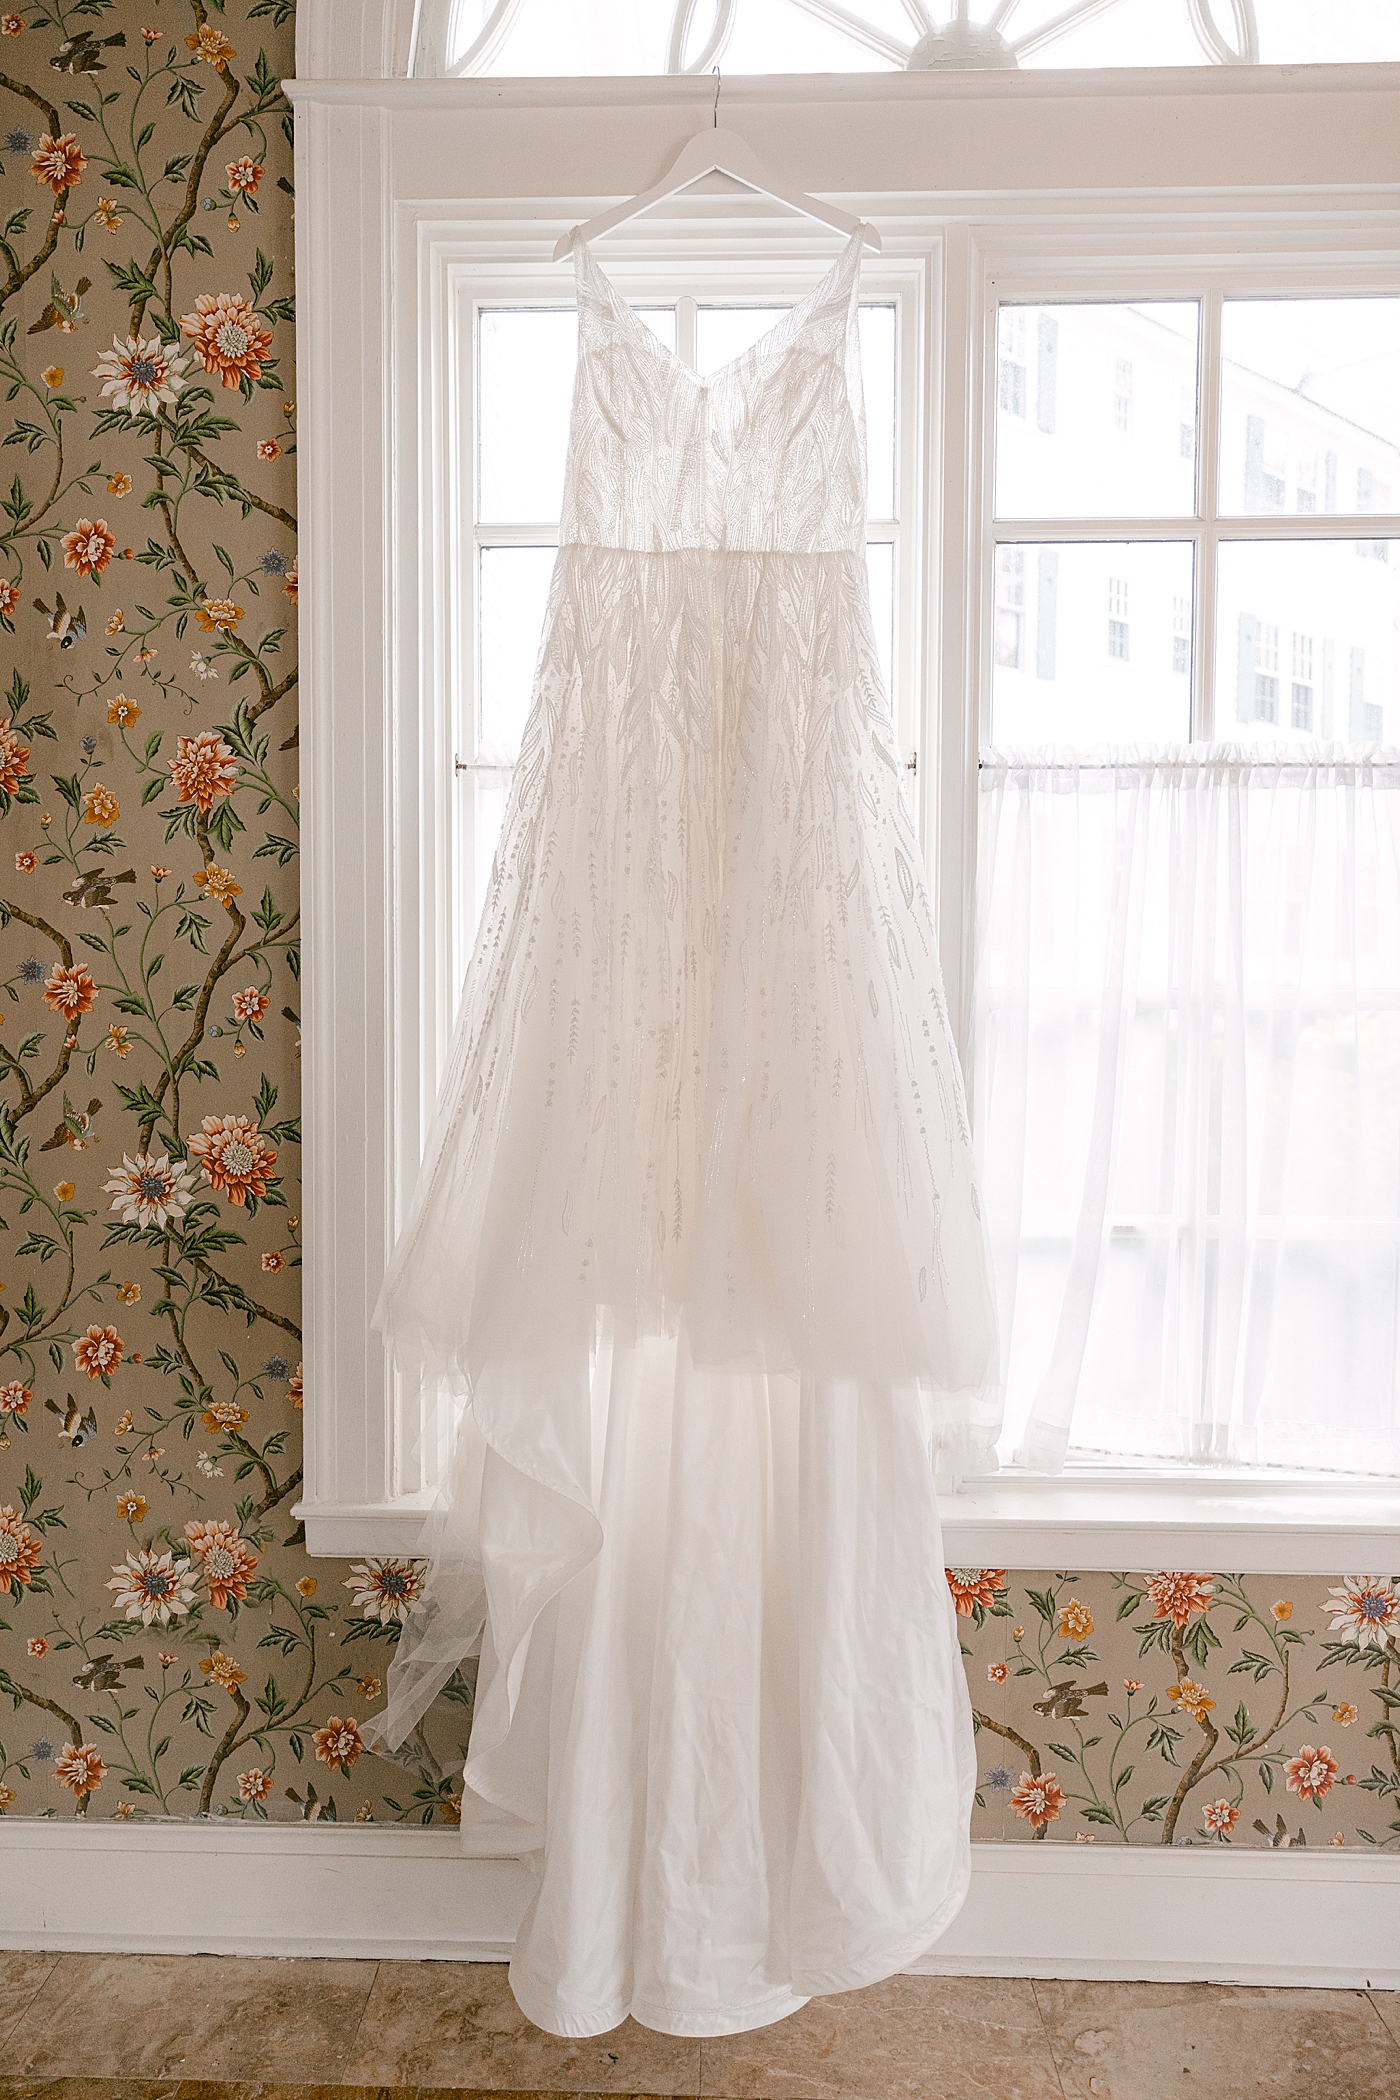 Sheer wedding dress hanging in front of a window with a glimpse of floral wall paper | Image by Hope Helmuth Photography